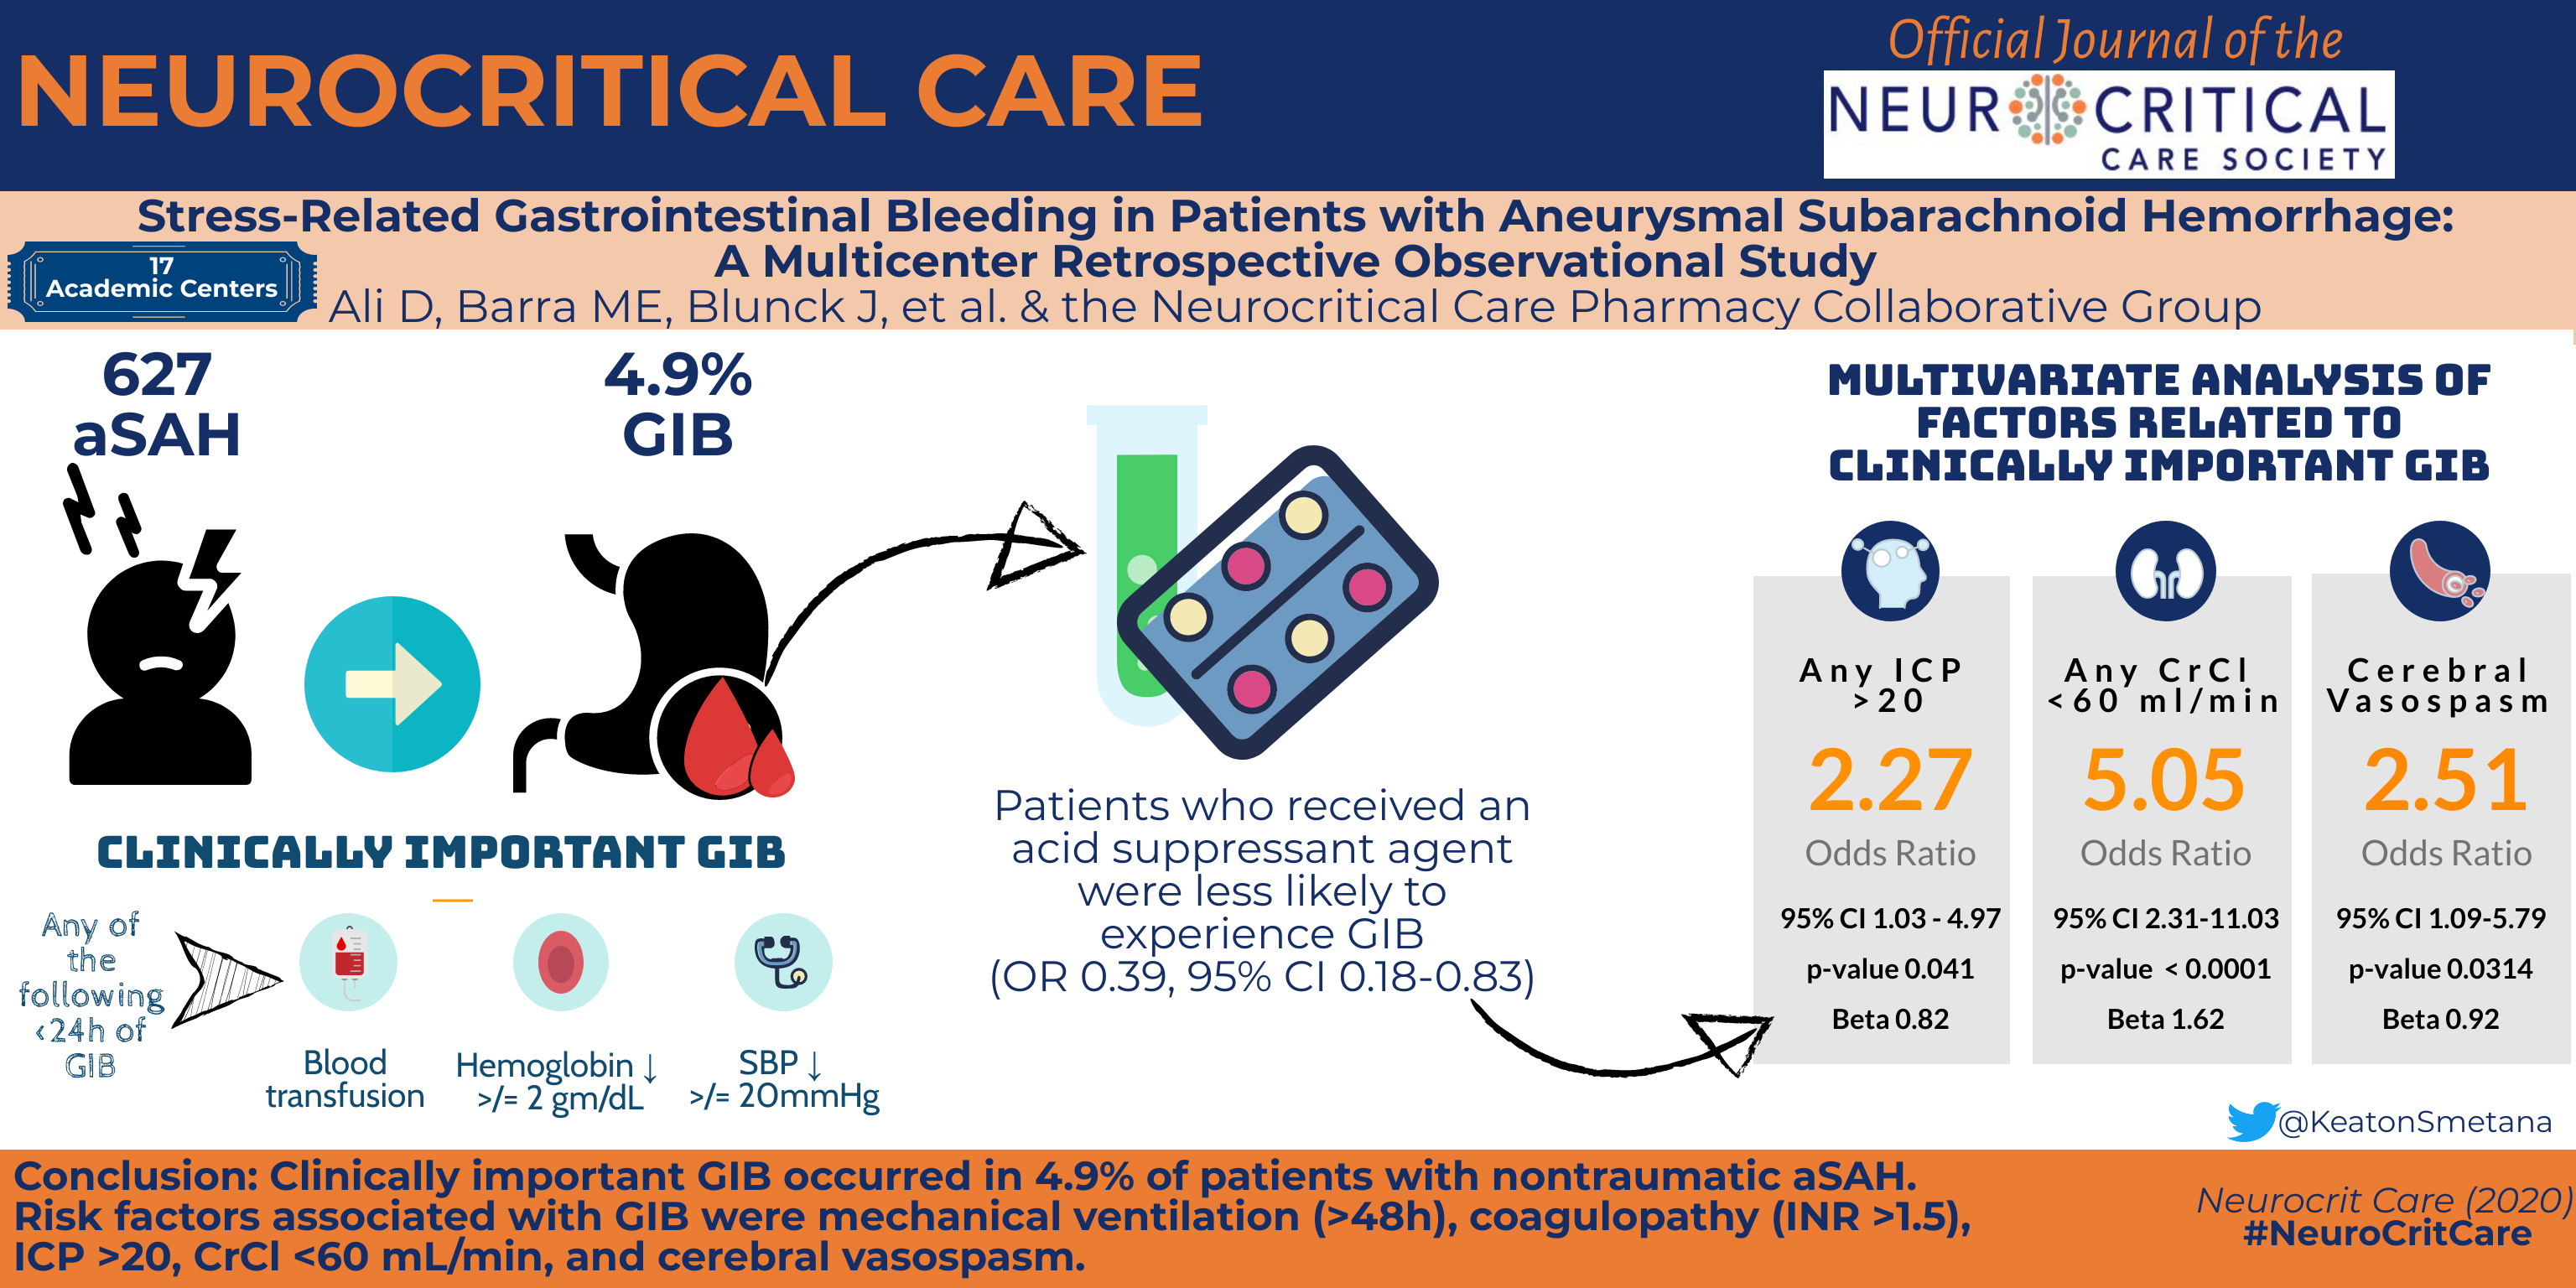 Stress-Related Gastrointestinal Bleeding in Patients with Aneurysmal Subarachnoid Hemorrhage: A Multicenter Retrospective Observational Study